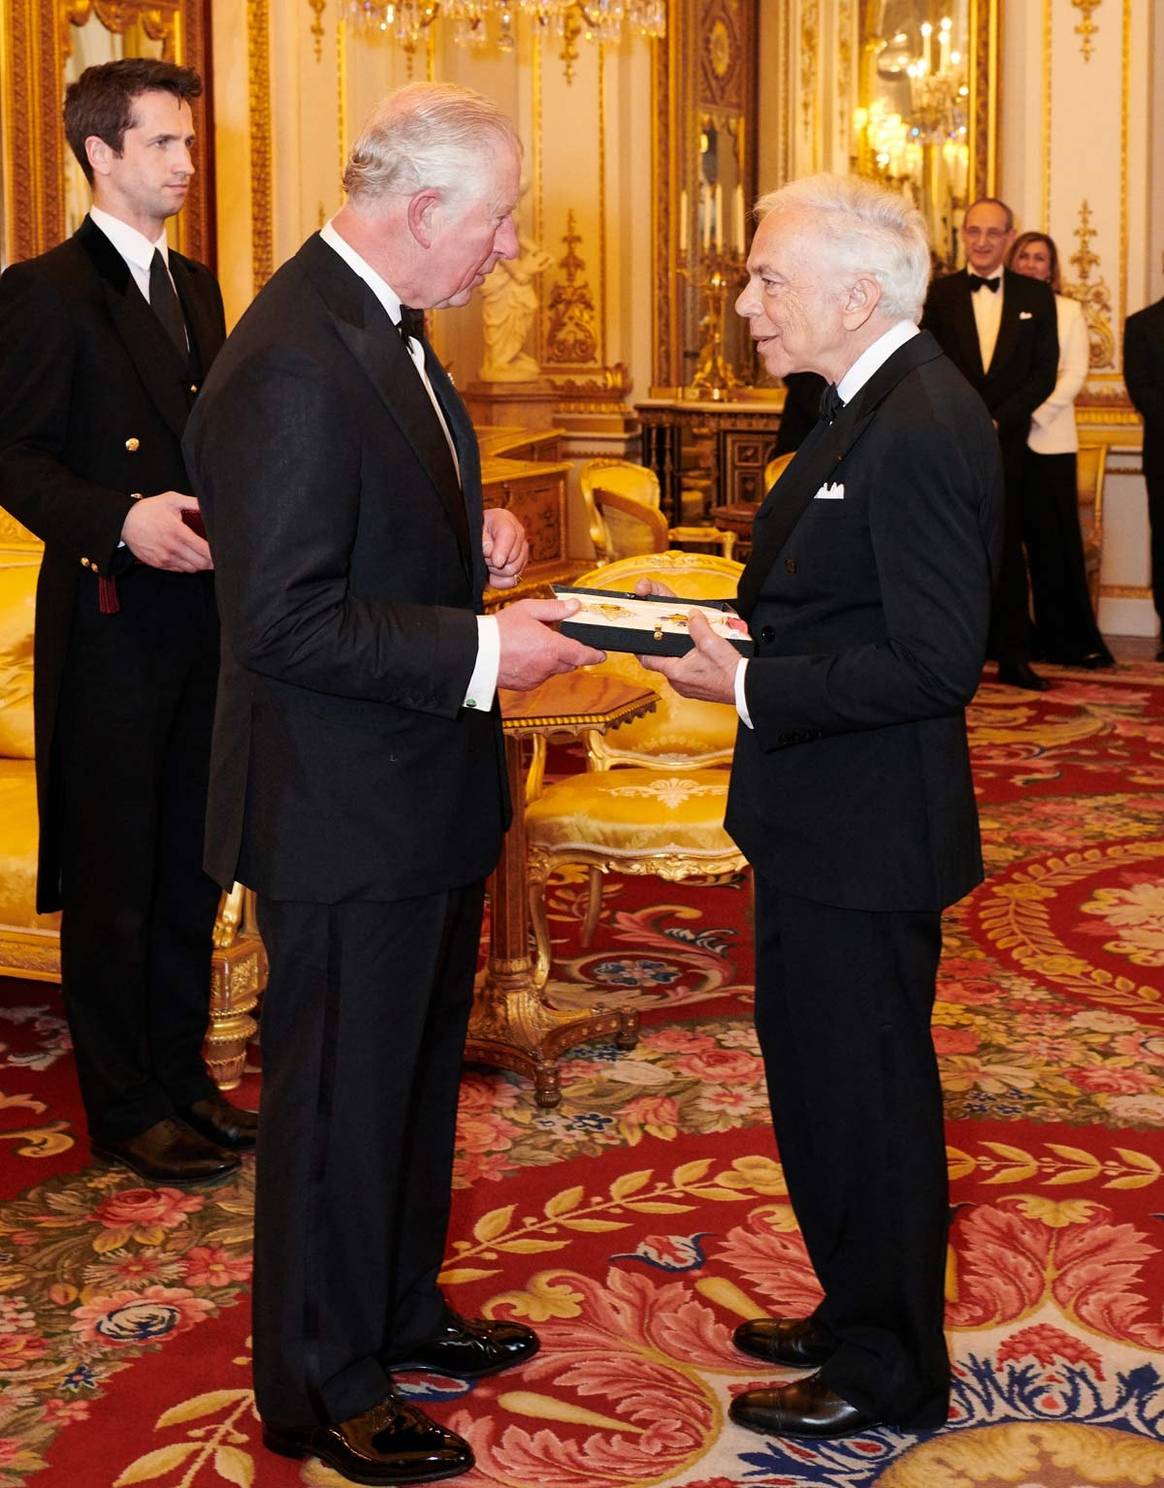 Ralph Lauren receives honorary knighthood for services to fashion